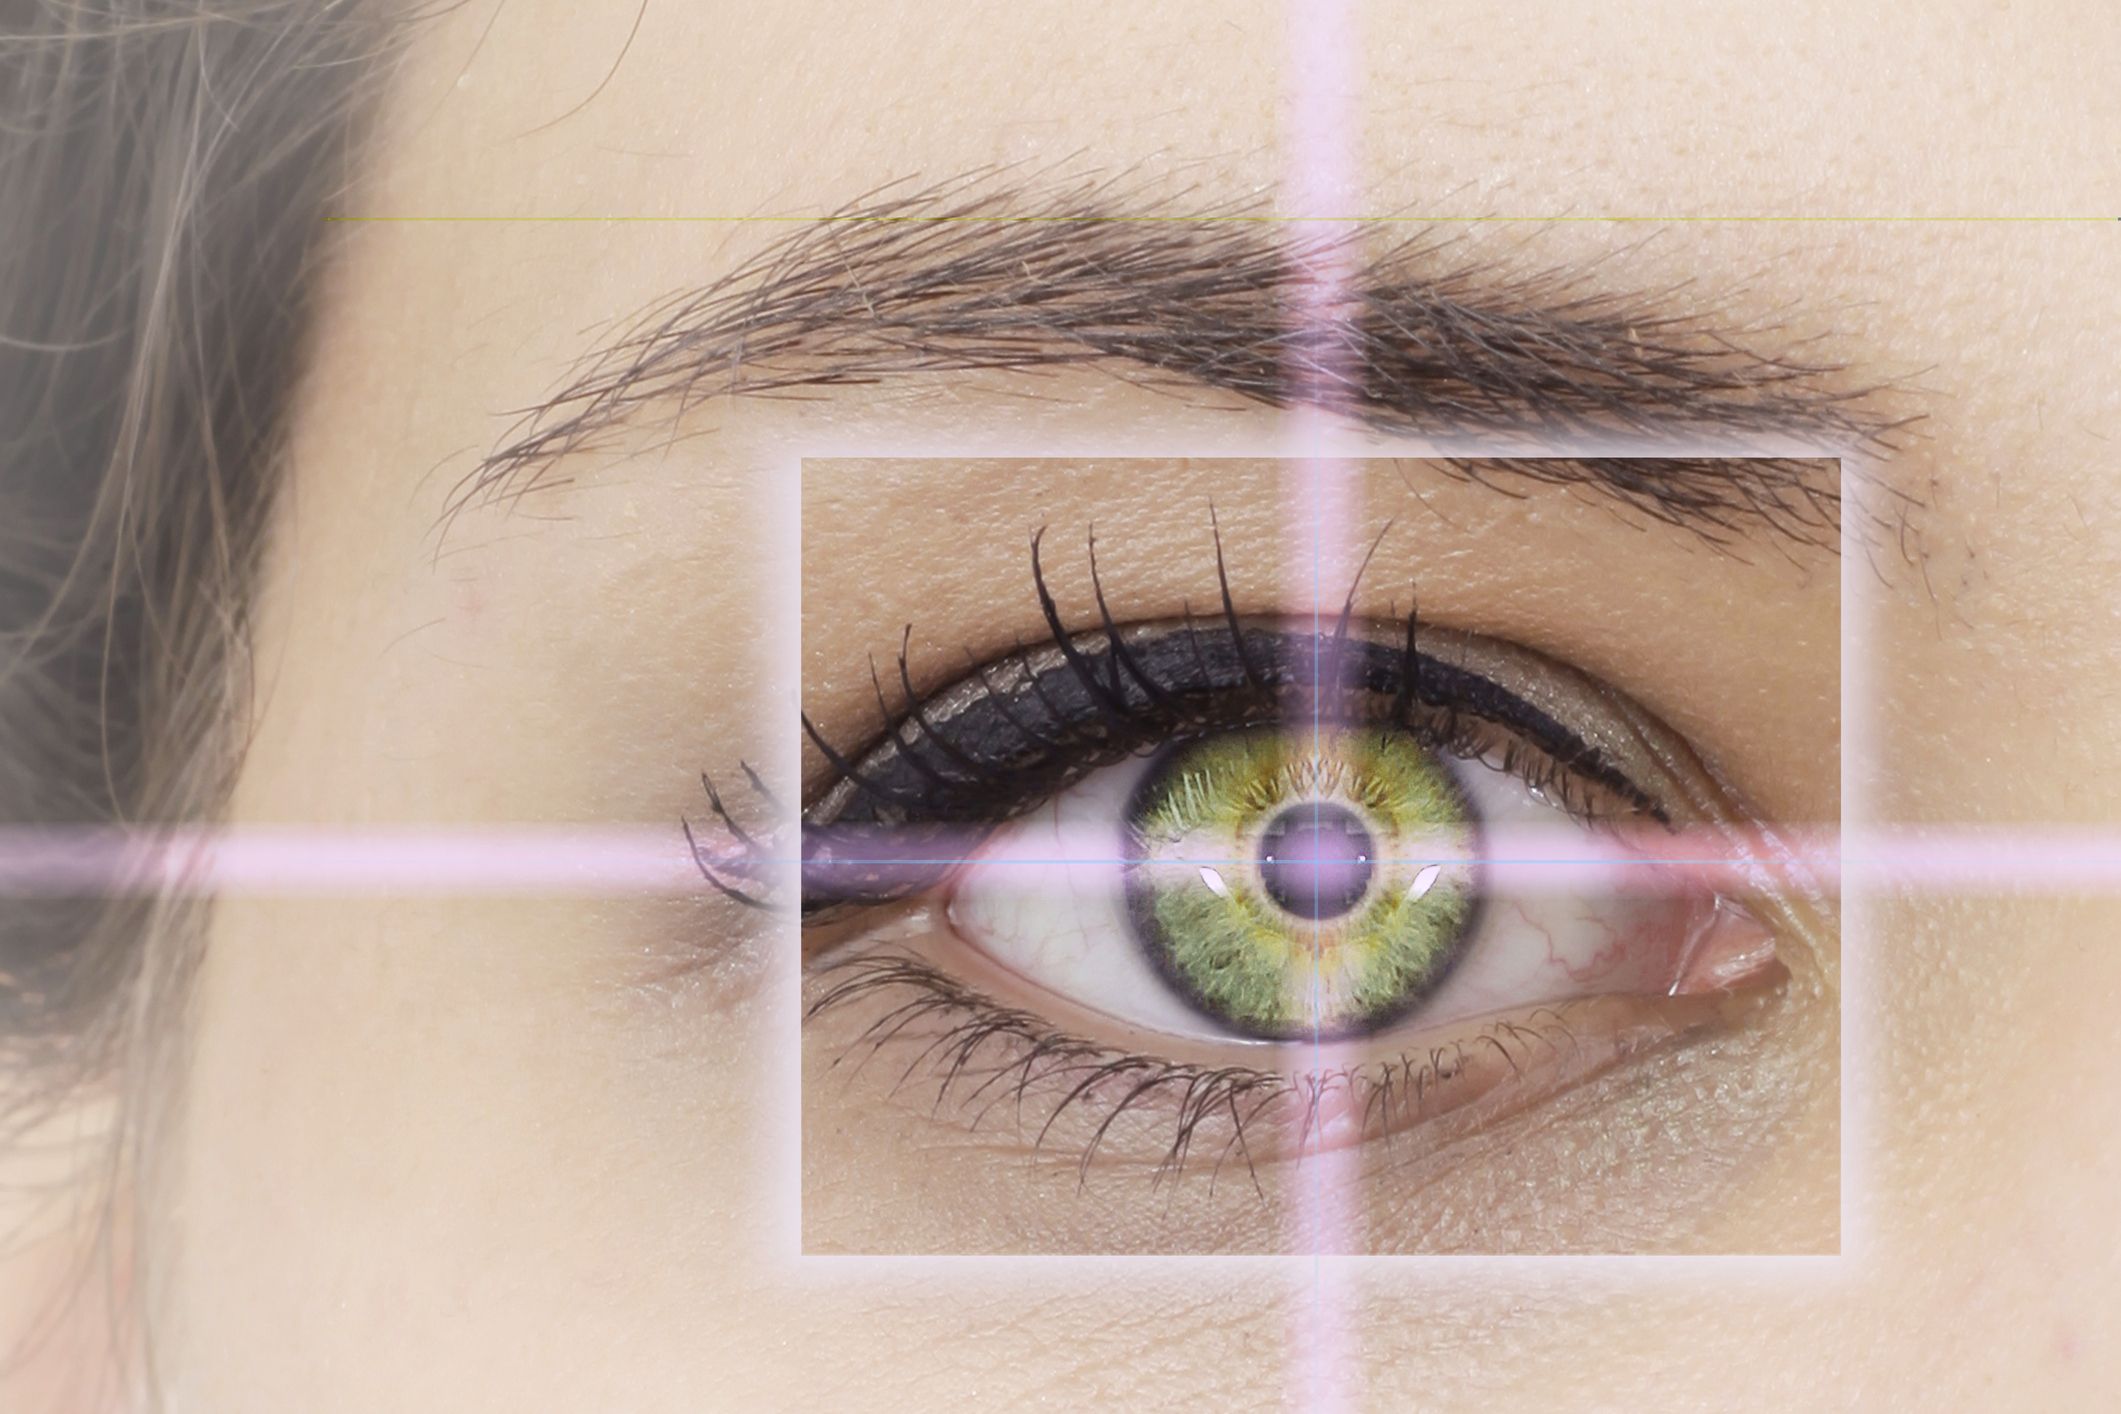 Top 5 Reasons To Choose LASIK For Your Vision Correction